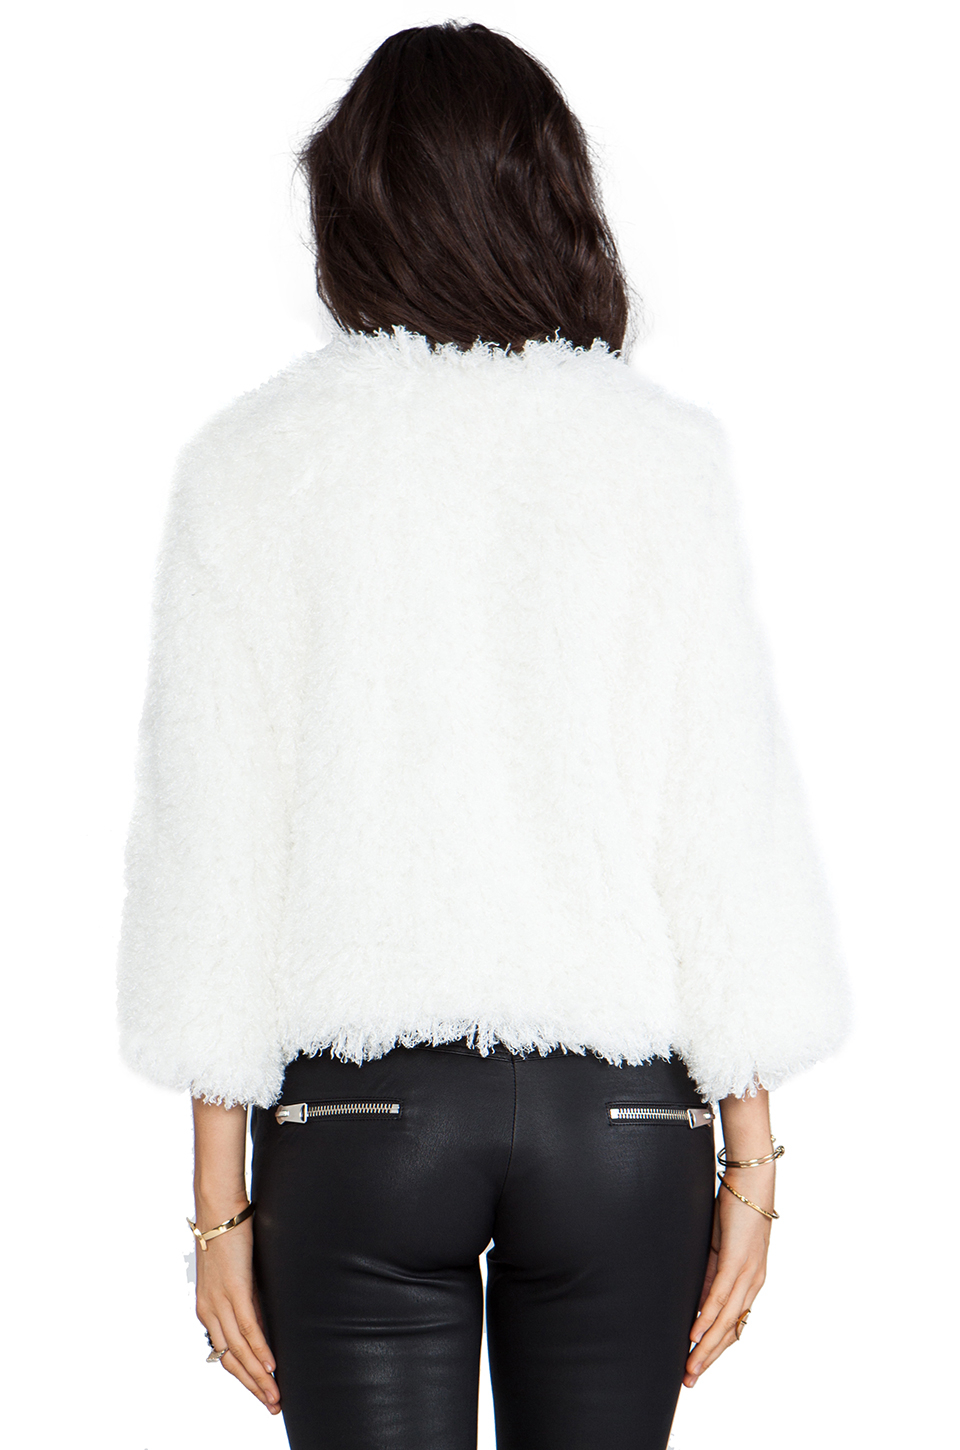 Lyst - Anna Sui Runway Mongolian Faux Fur Jacket in Ivory in White